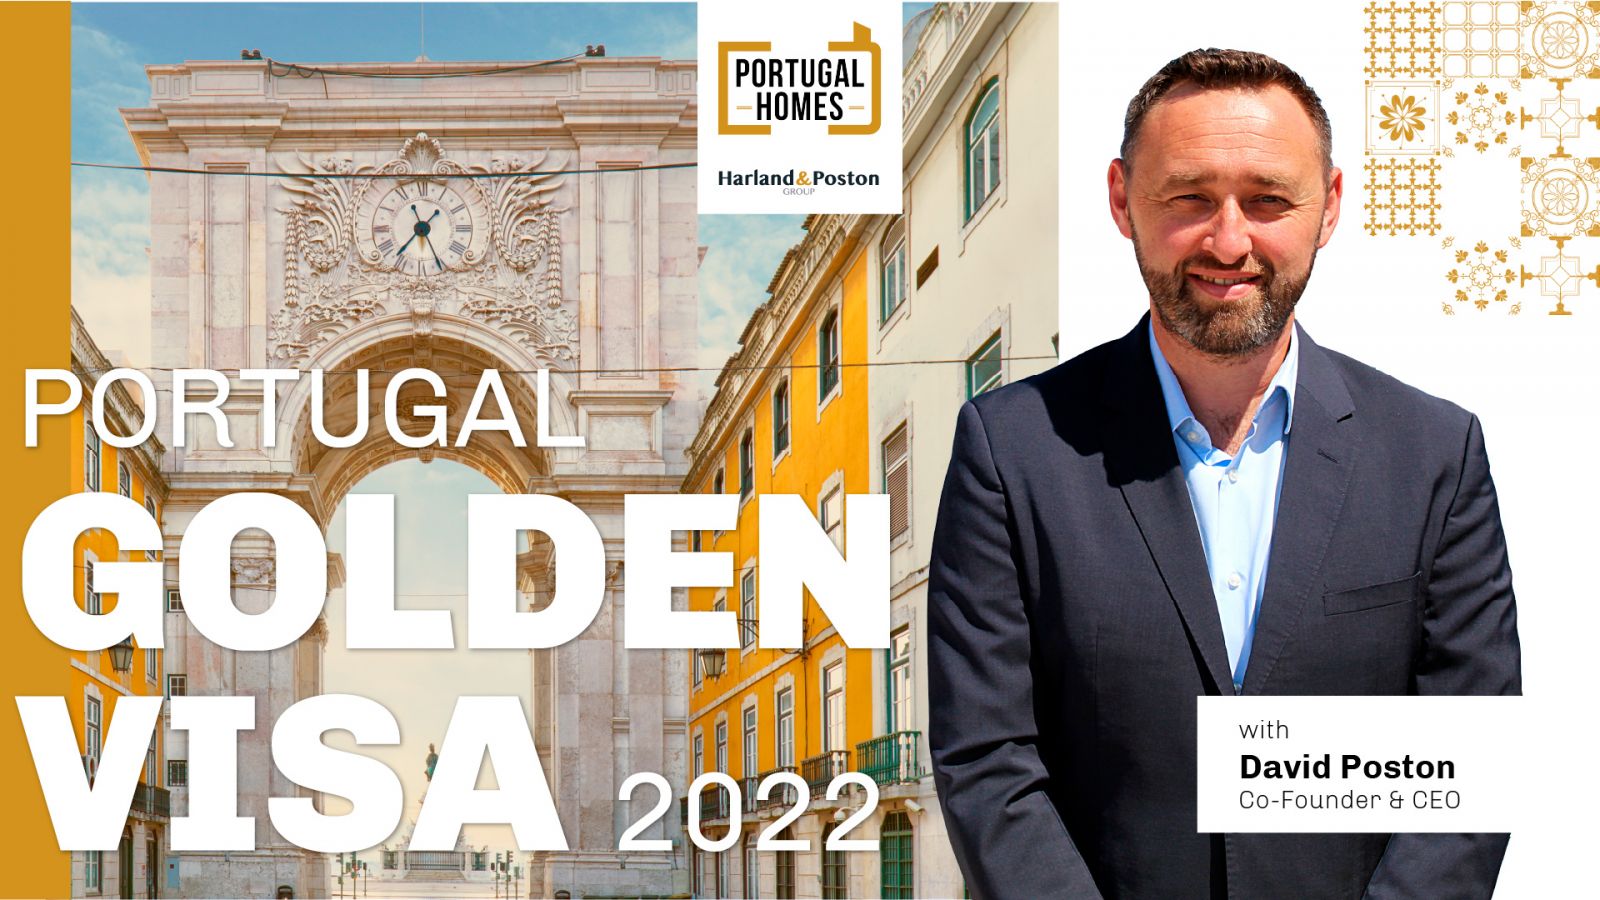 Watch the Portugal Golden Visa 2022 video with David Poston.